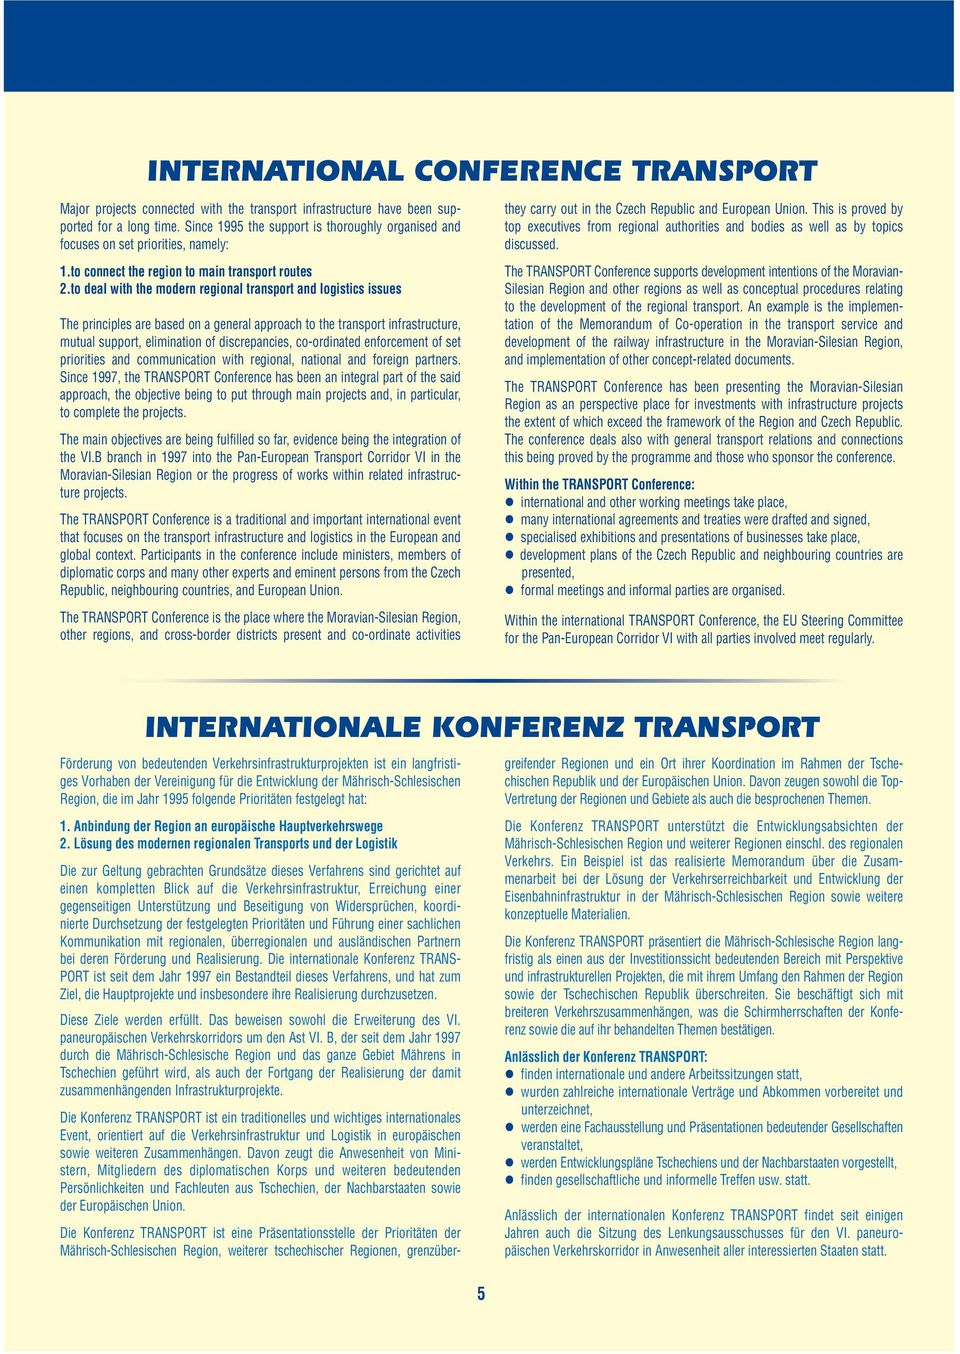 to deal with the modern regional transport and logistics issues The principles are based on a general approach to the transport infrastructure, mutual support, elimination of discrepancies, co